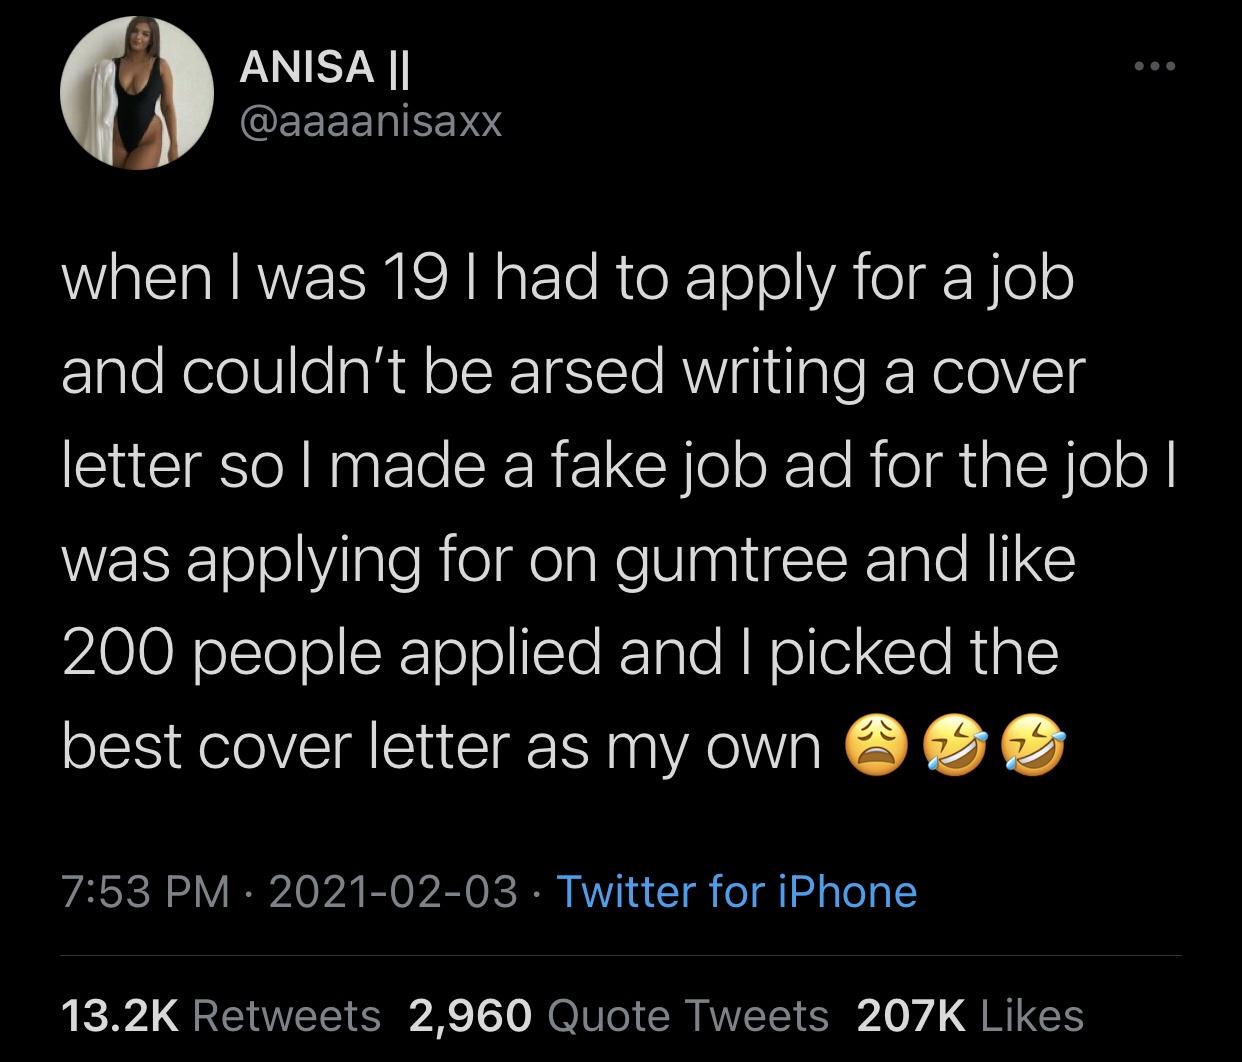 atmosphere - Anisa || when I was 191 had to apply for a job and couldn't be arsed writing a cover letter sol made a fake job ad for the job | was applying for on gumtree and 200 people applied and I picked the best cover letter as my own Twitter for iPhon